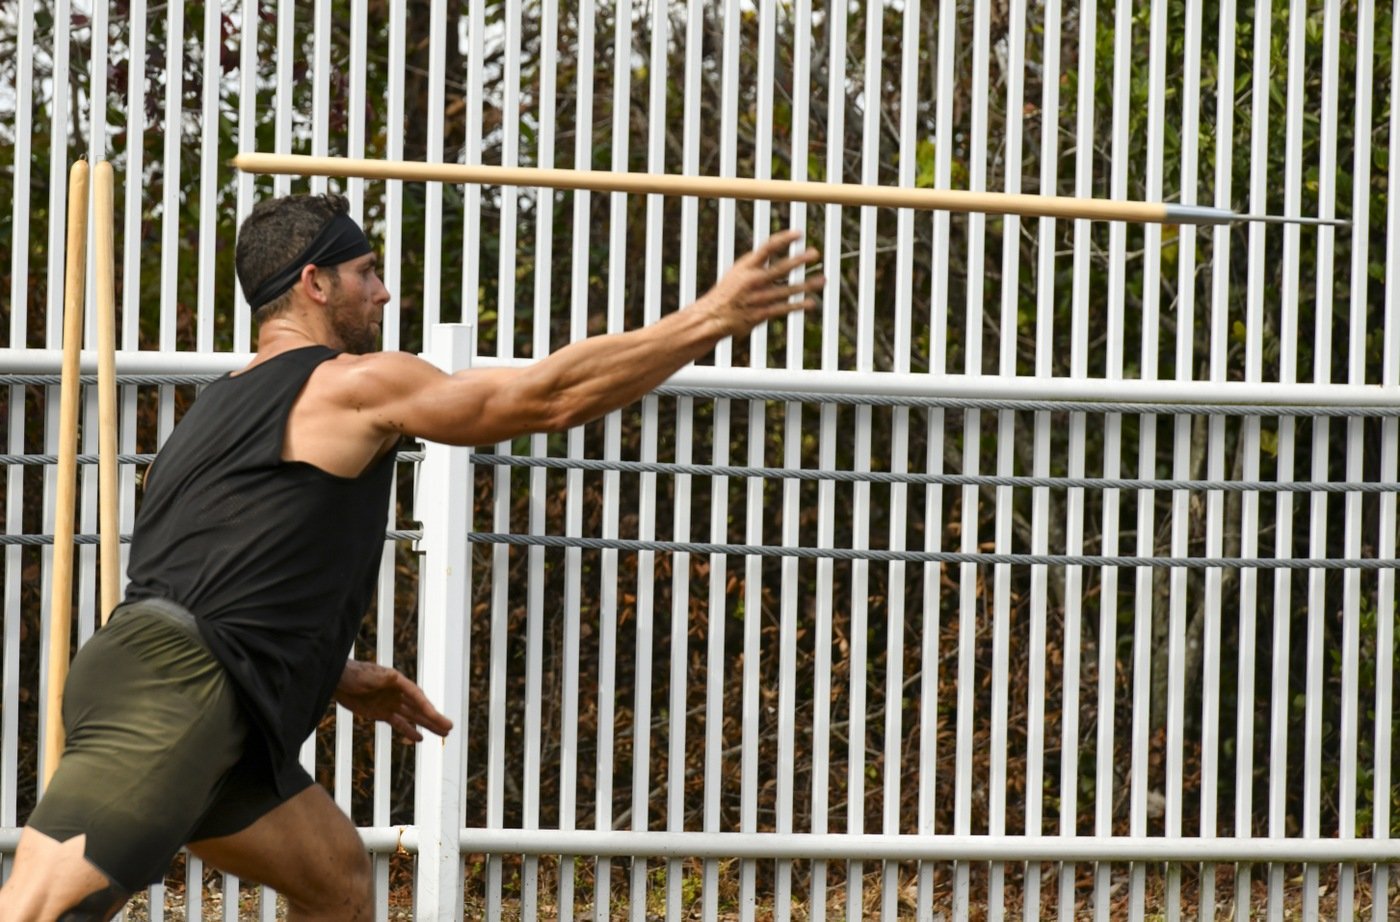 An FBI Miami employee throws a javelin during a series of workouts on Feb. 4, 2022 to honor the memory of fallen Special Agents Daniel Alfin and Laura Schwartzenberger.